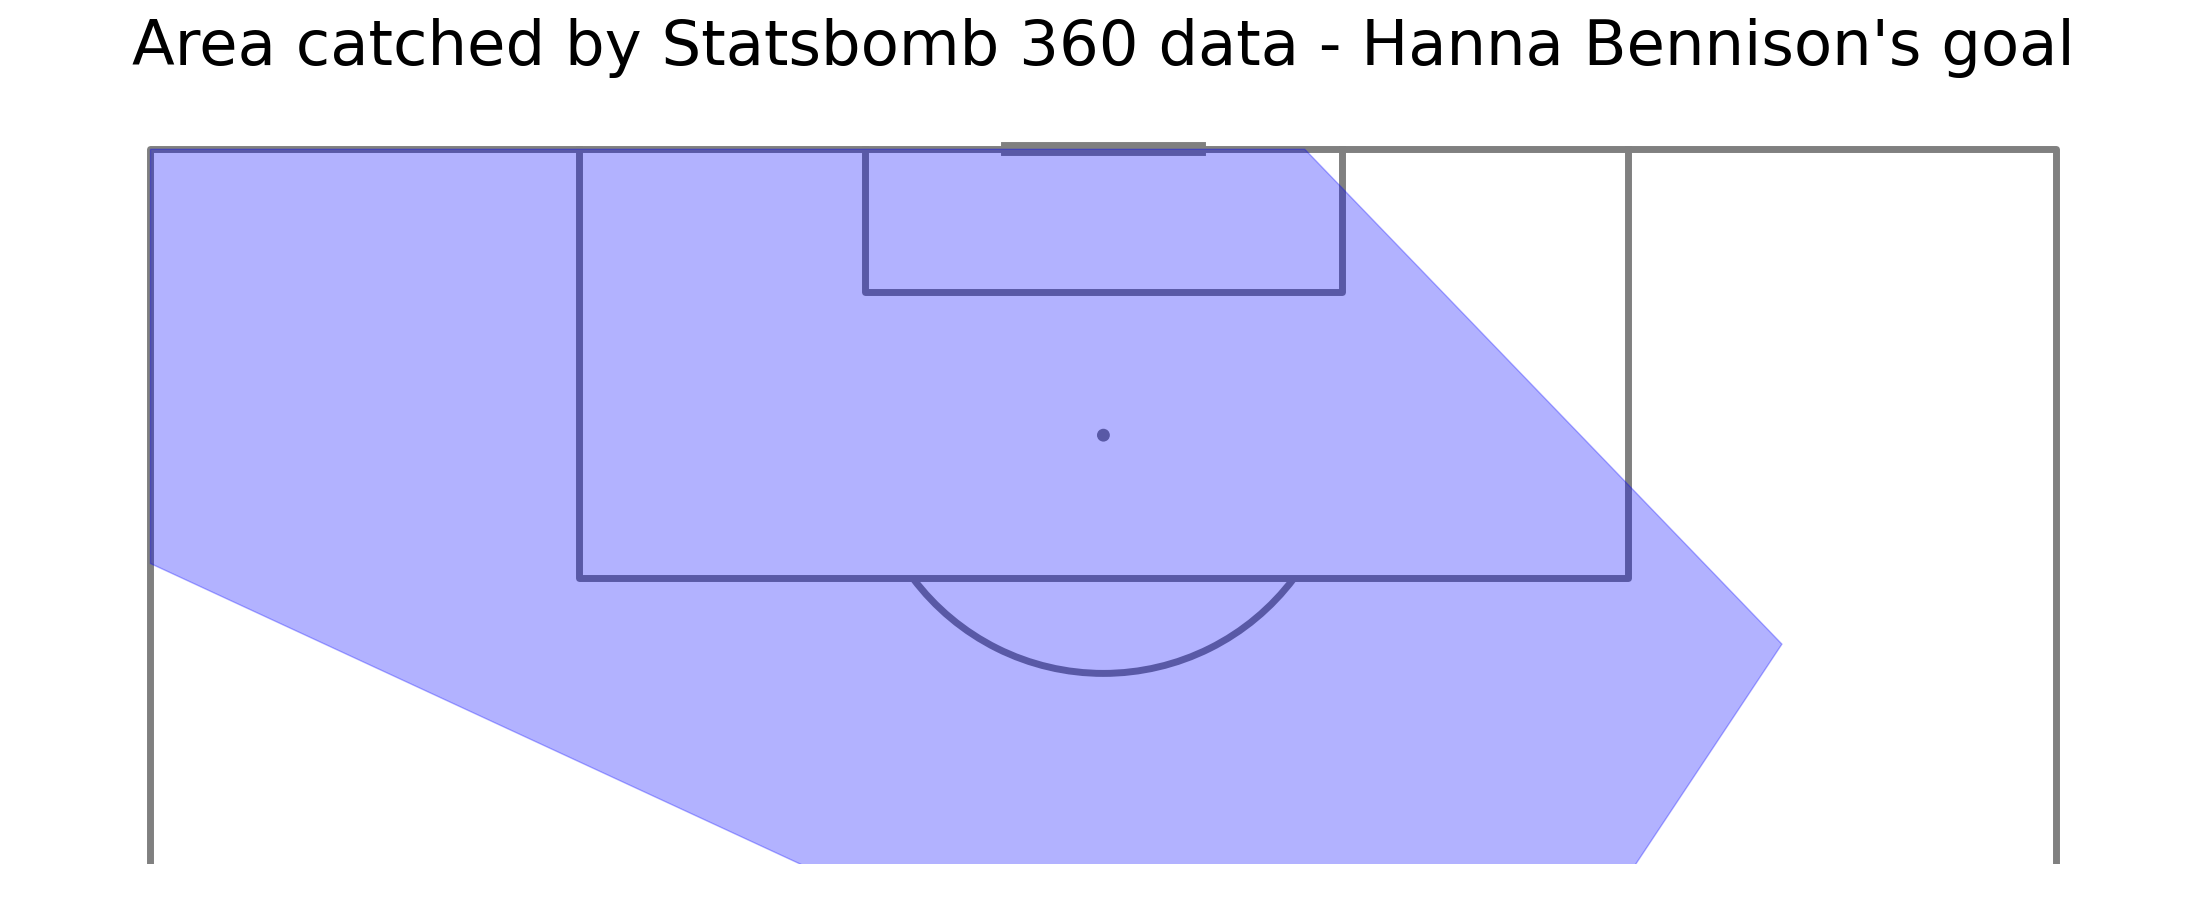 Area catched by Statsbomb 360 data - Hanna Bennison's goal